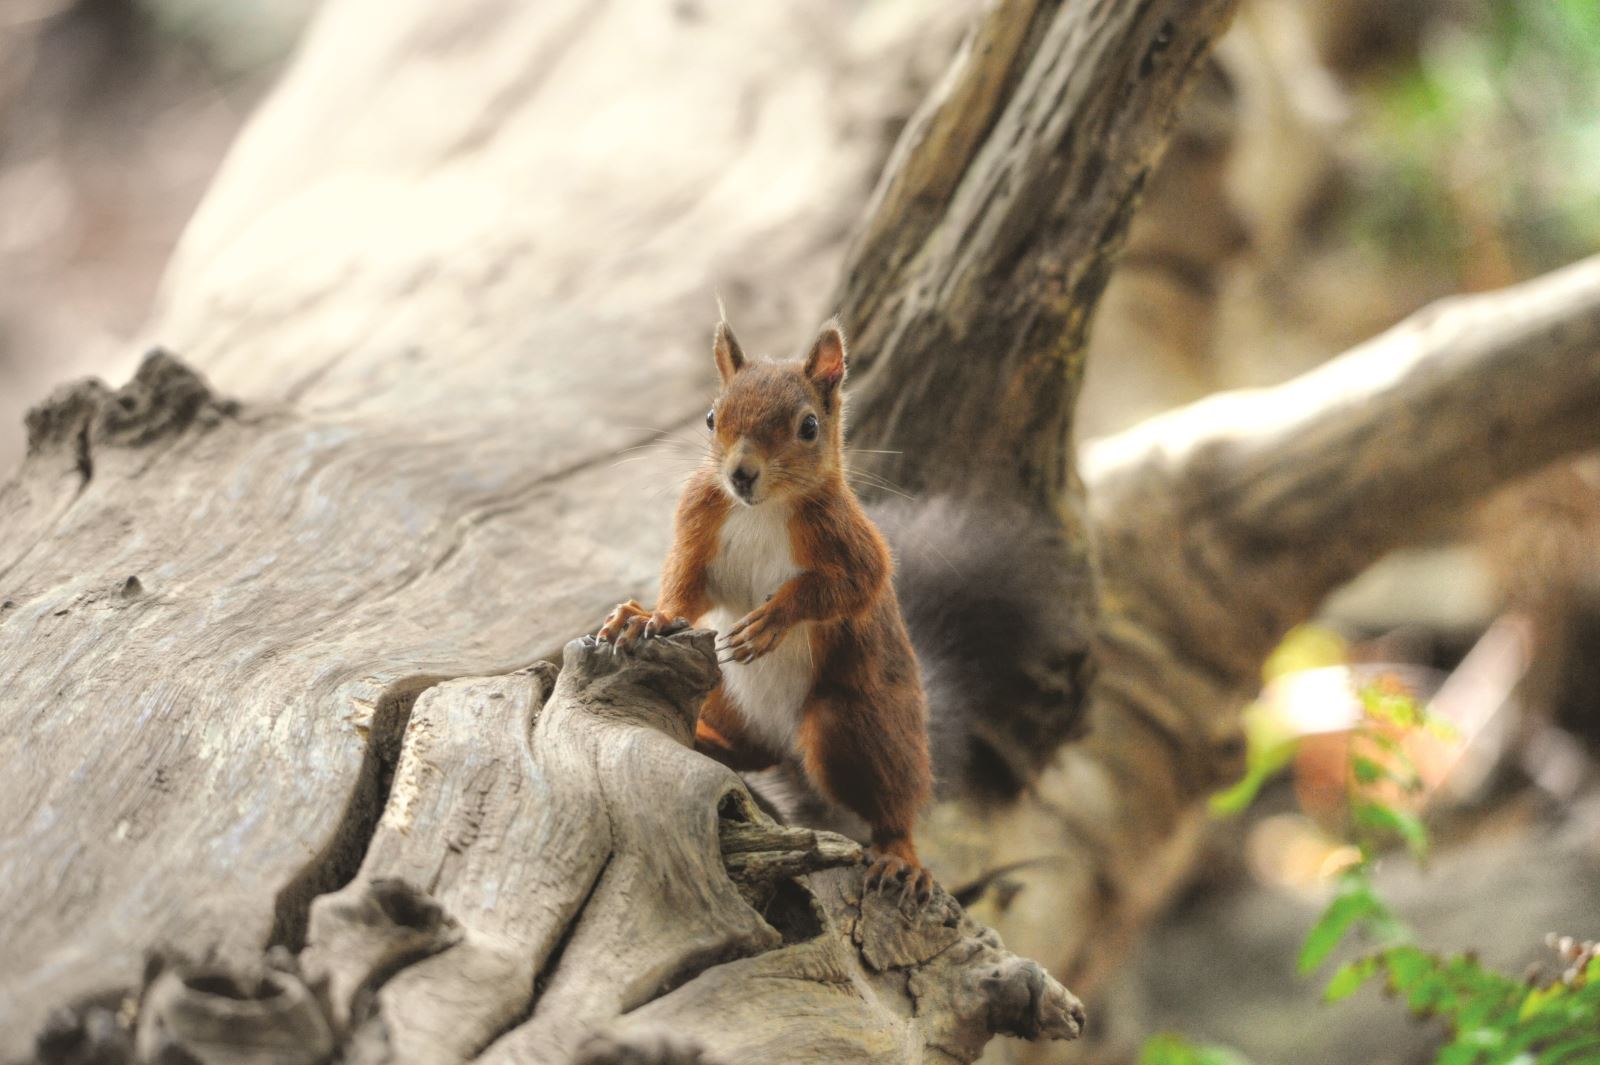 A notably photogenic red squirrel sitting upon a tree on Brownsea Island